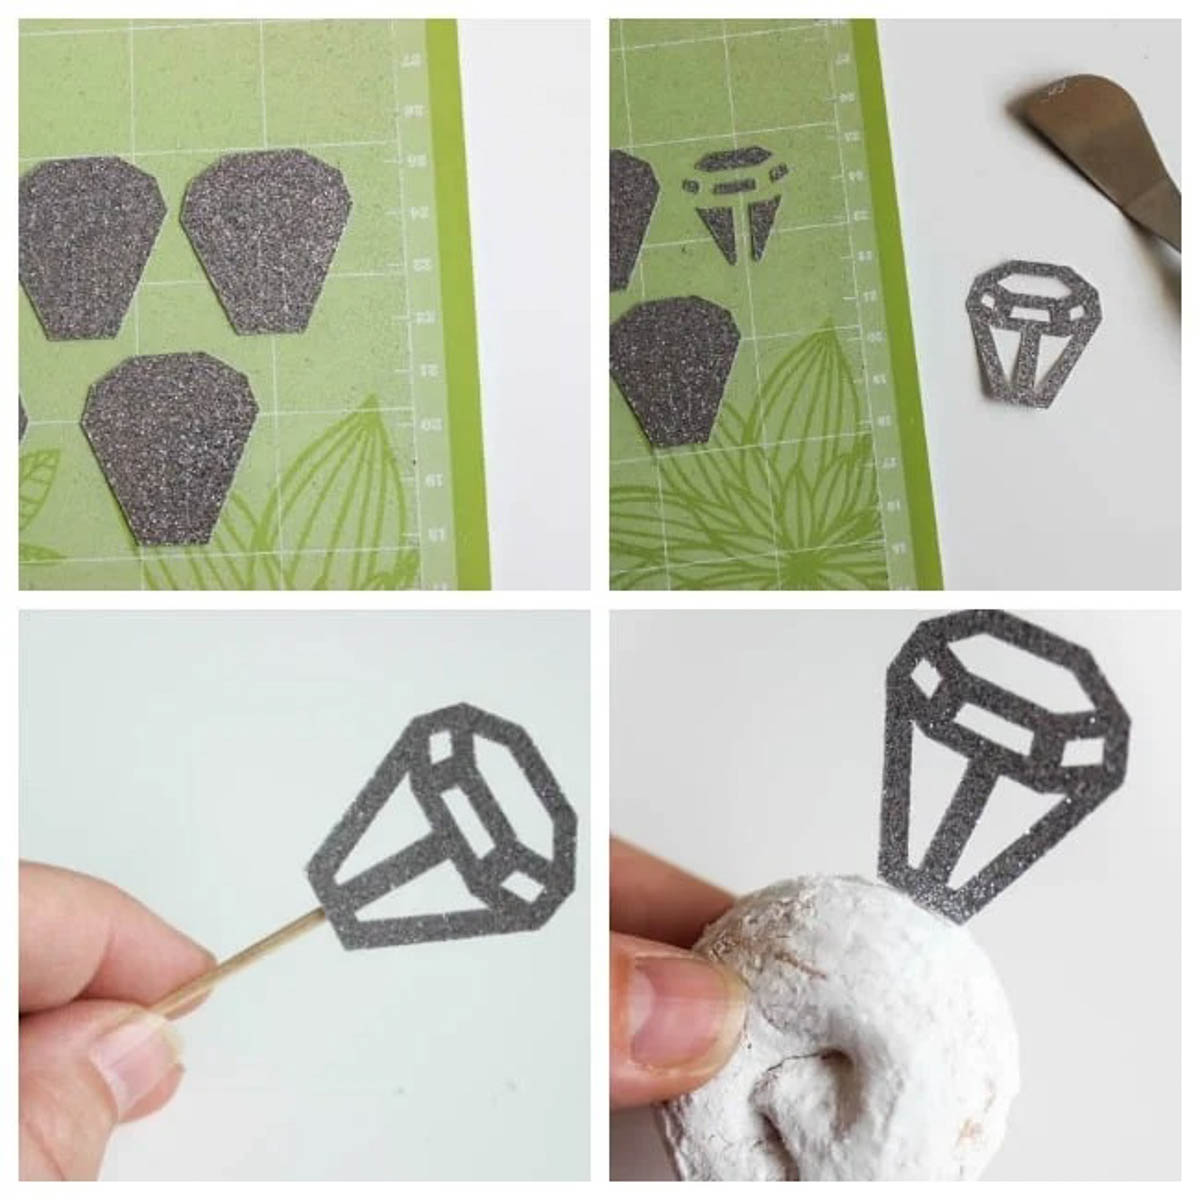 Weeding the cardstock diamonds as food decorations for the bridal shower decor